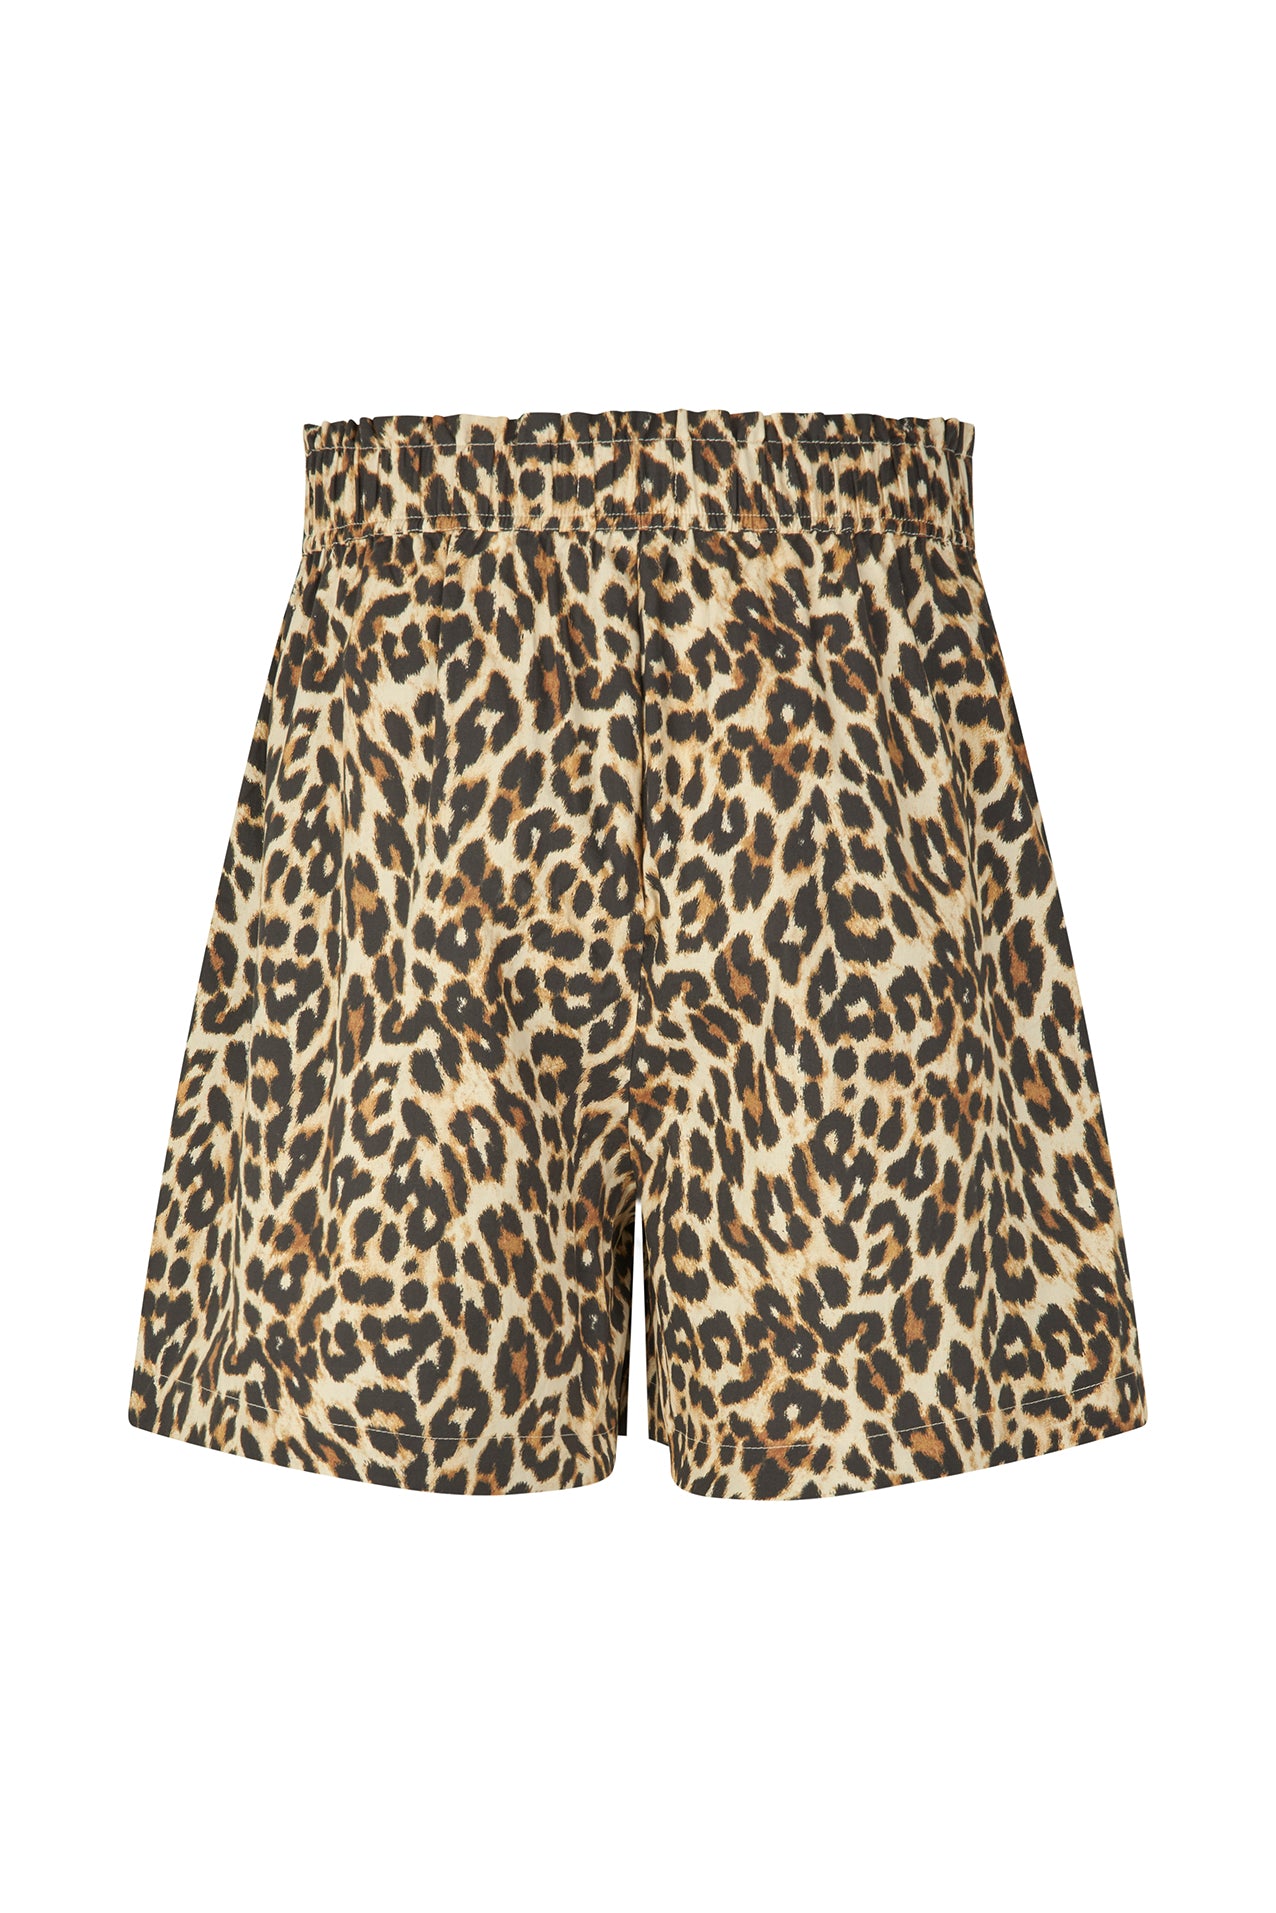 Lollys Laundry BlancaLL Shorts Clothes 72 Leopard Print